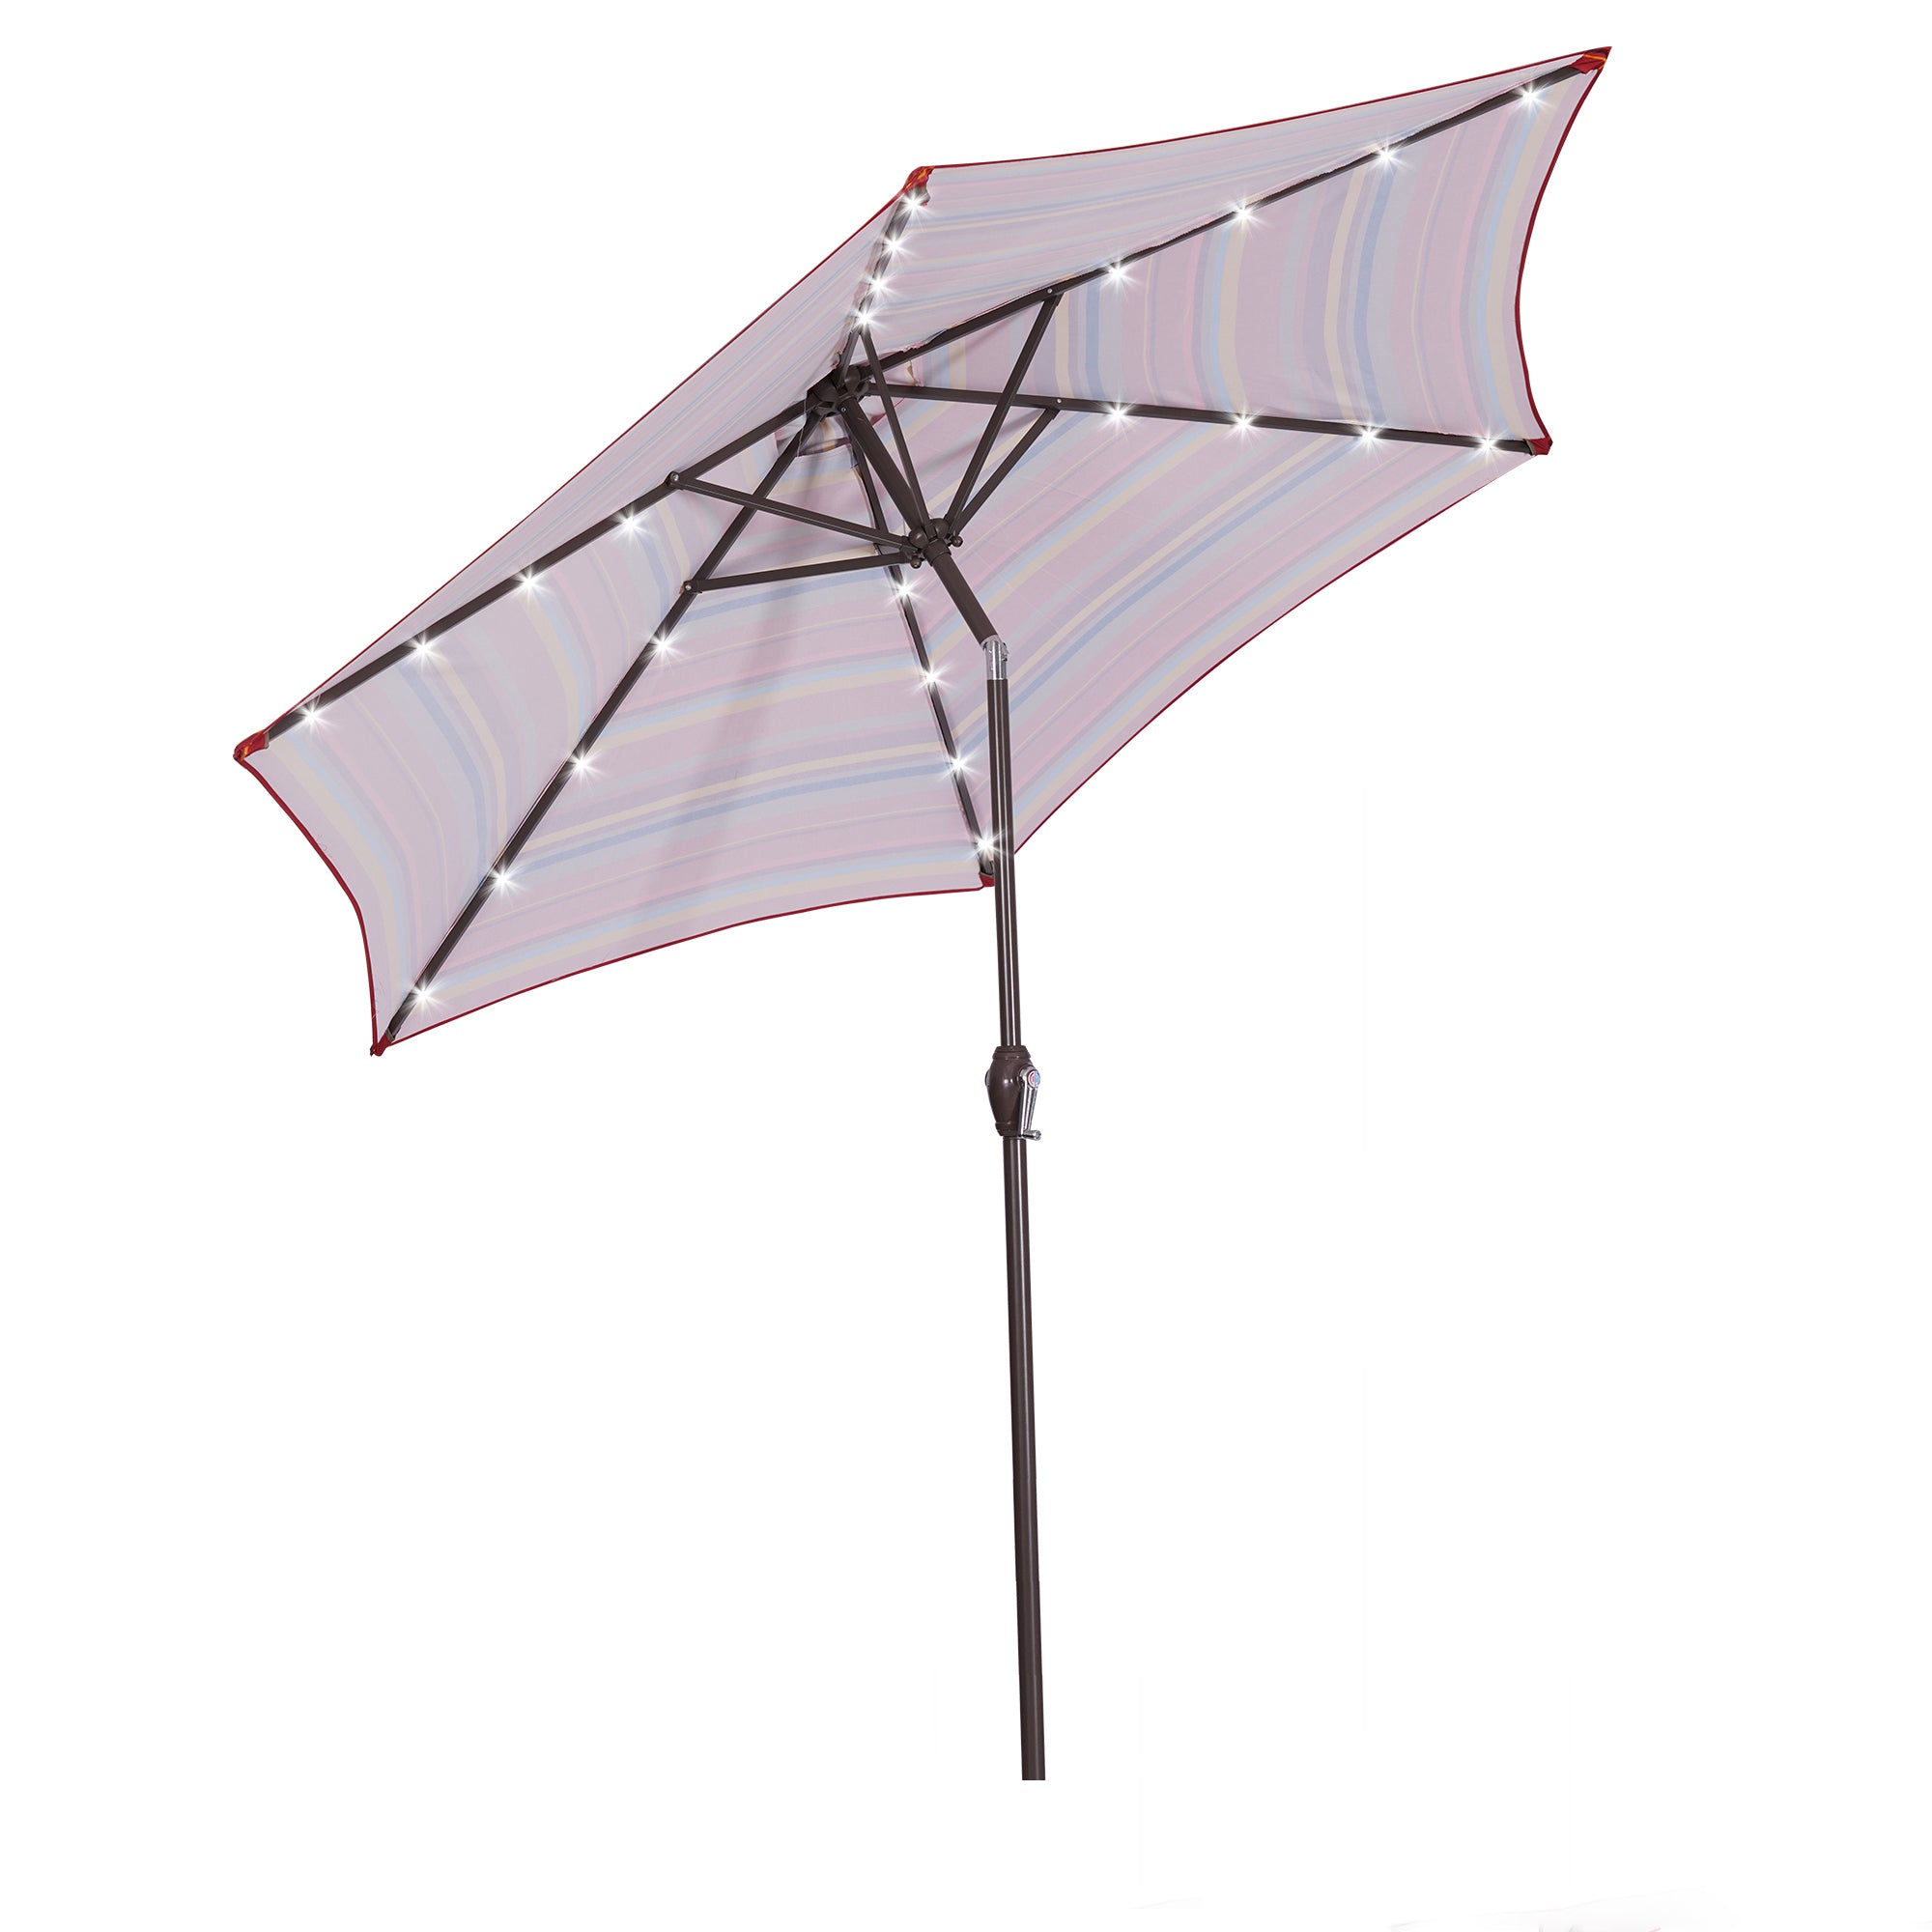 ametoys Outdoor Patio 8.7-Feet Market Table Umbrella with Push Button Tilt and Crank, Red Stripes With 24 [Umbrella Base is not Included]